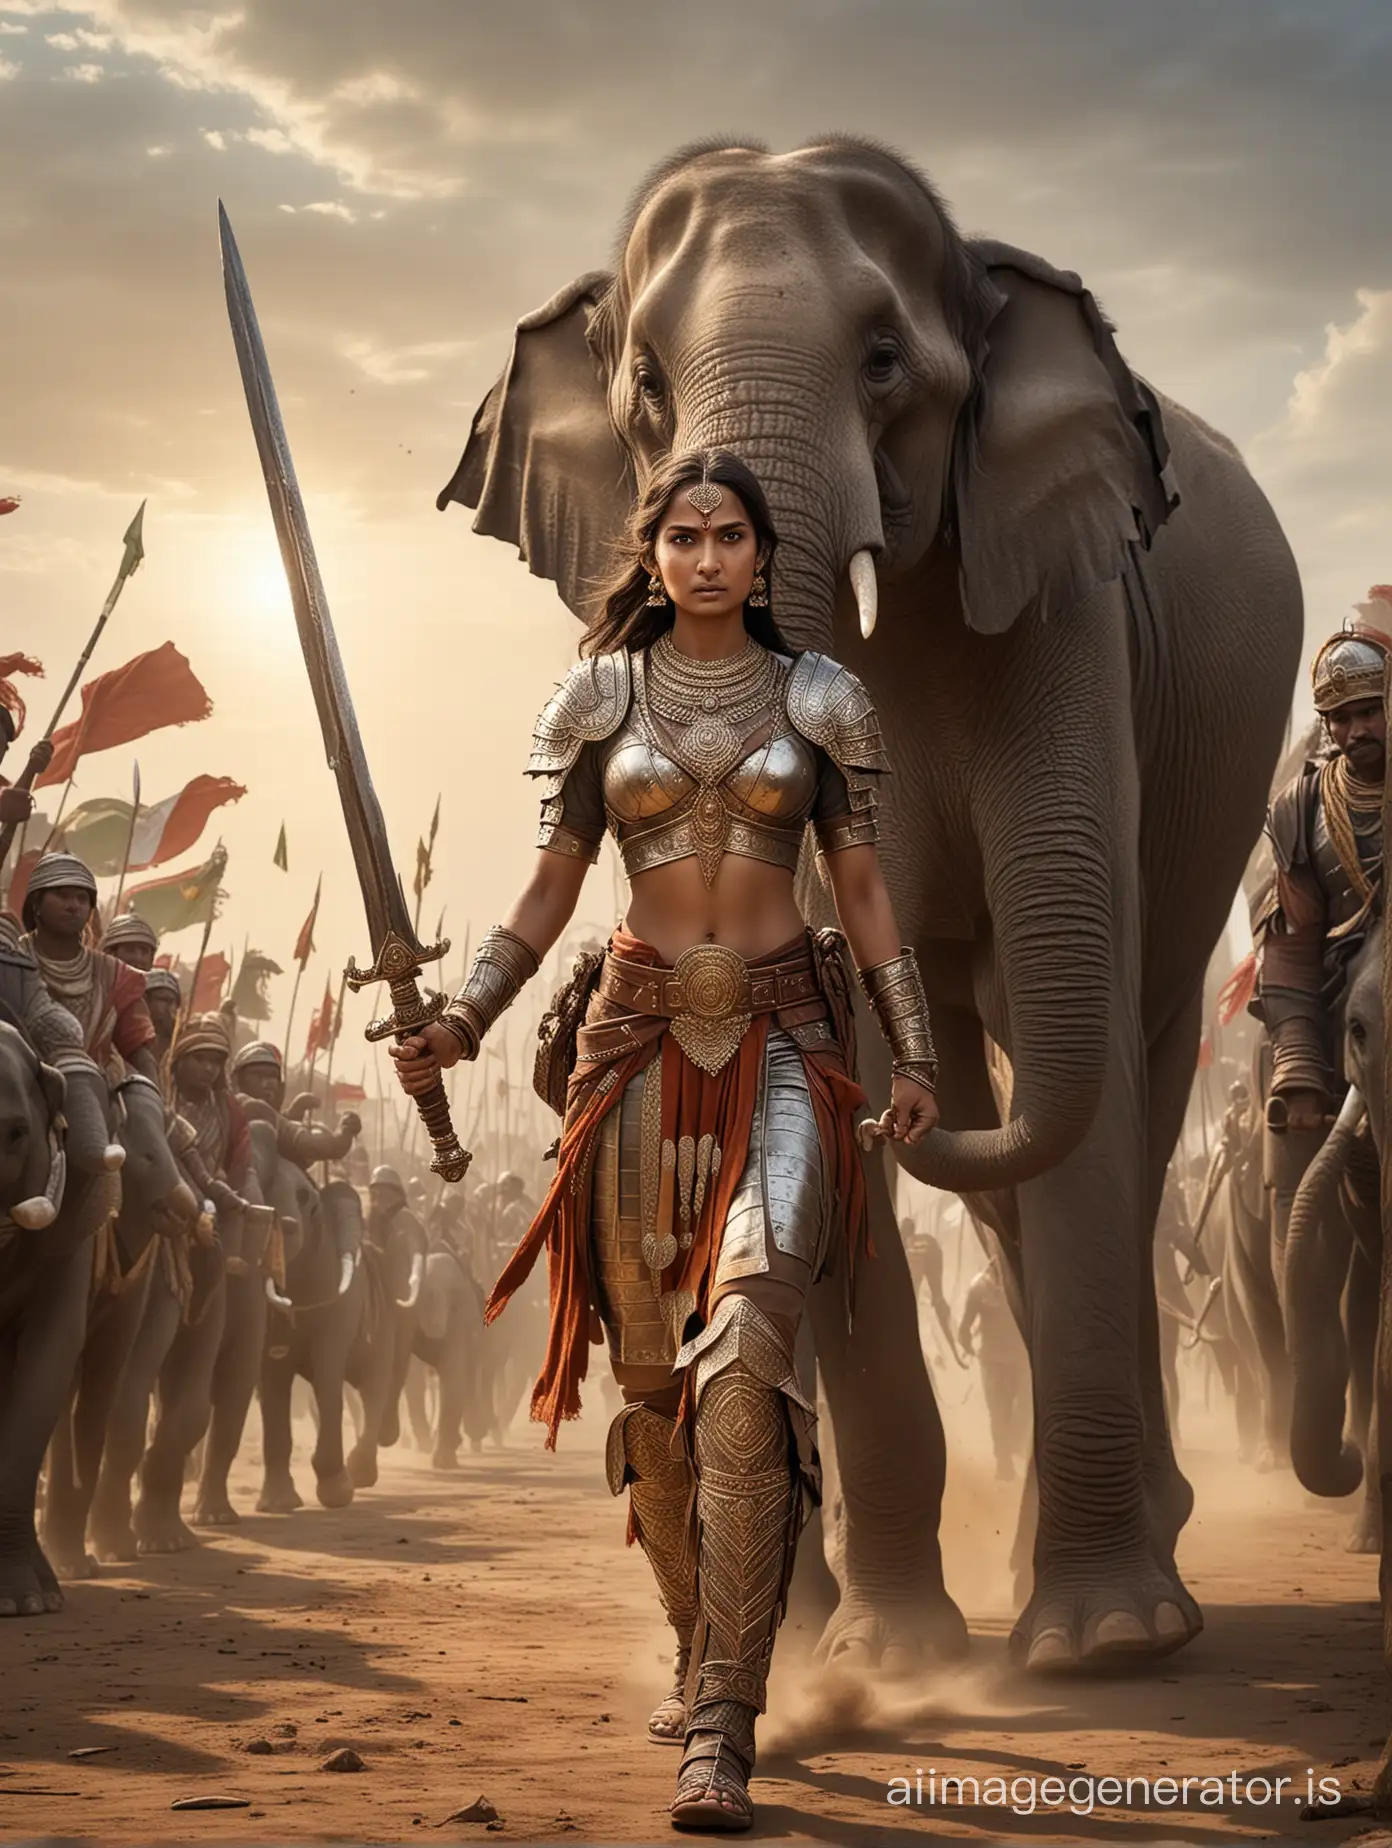 Indian-Woman-Warrior-on-Elephant-Leading-Foot-Soldiers-into-Battle